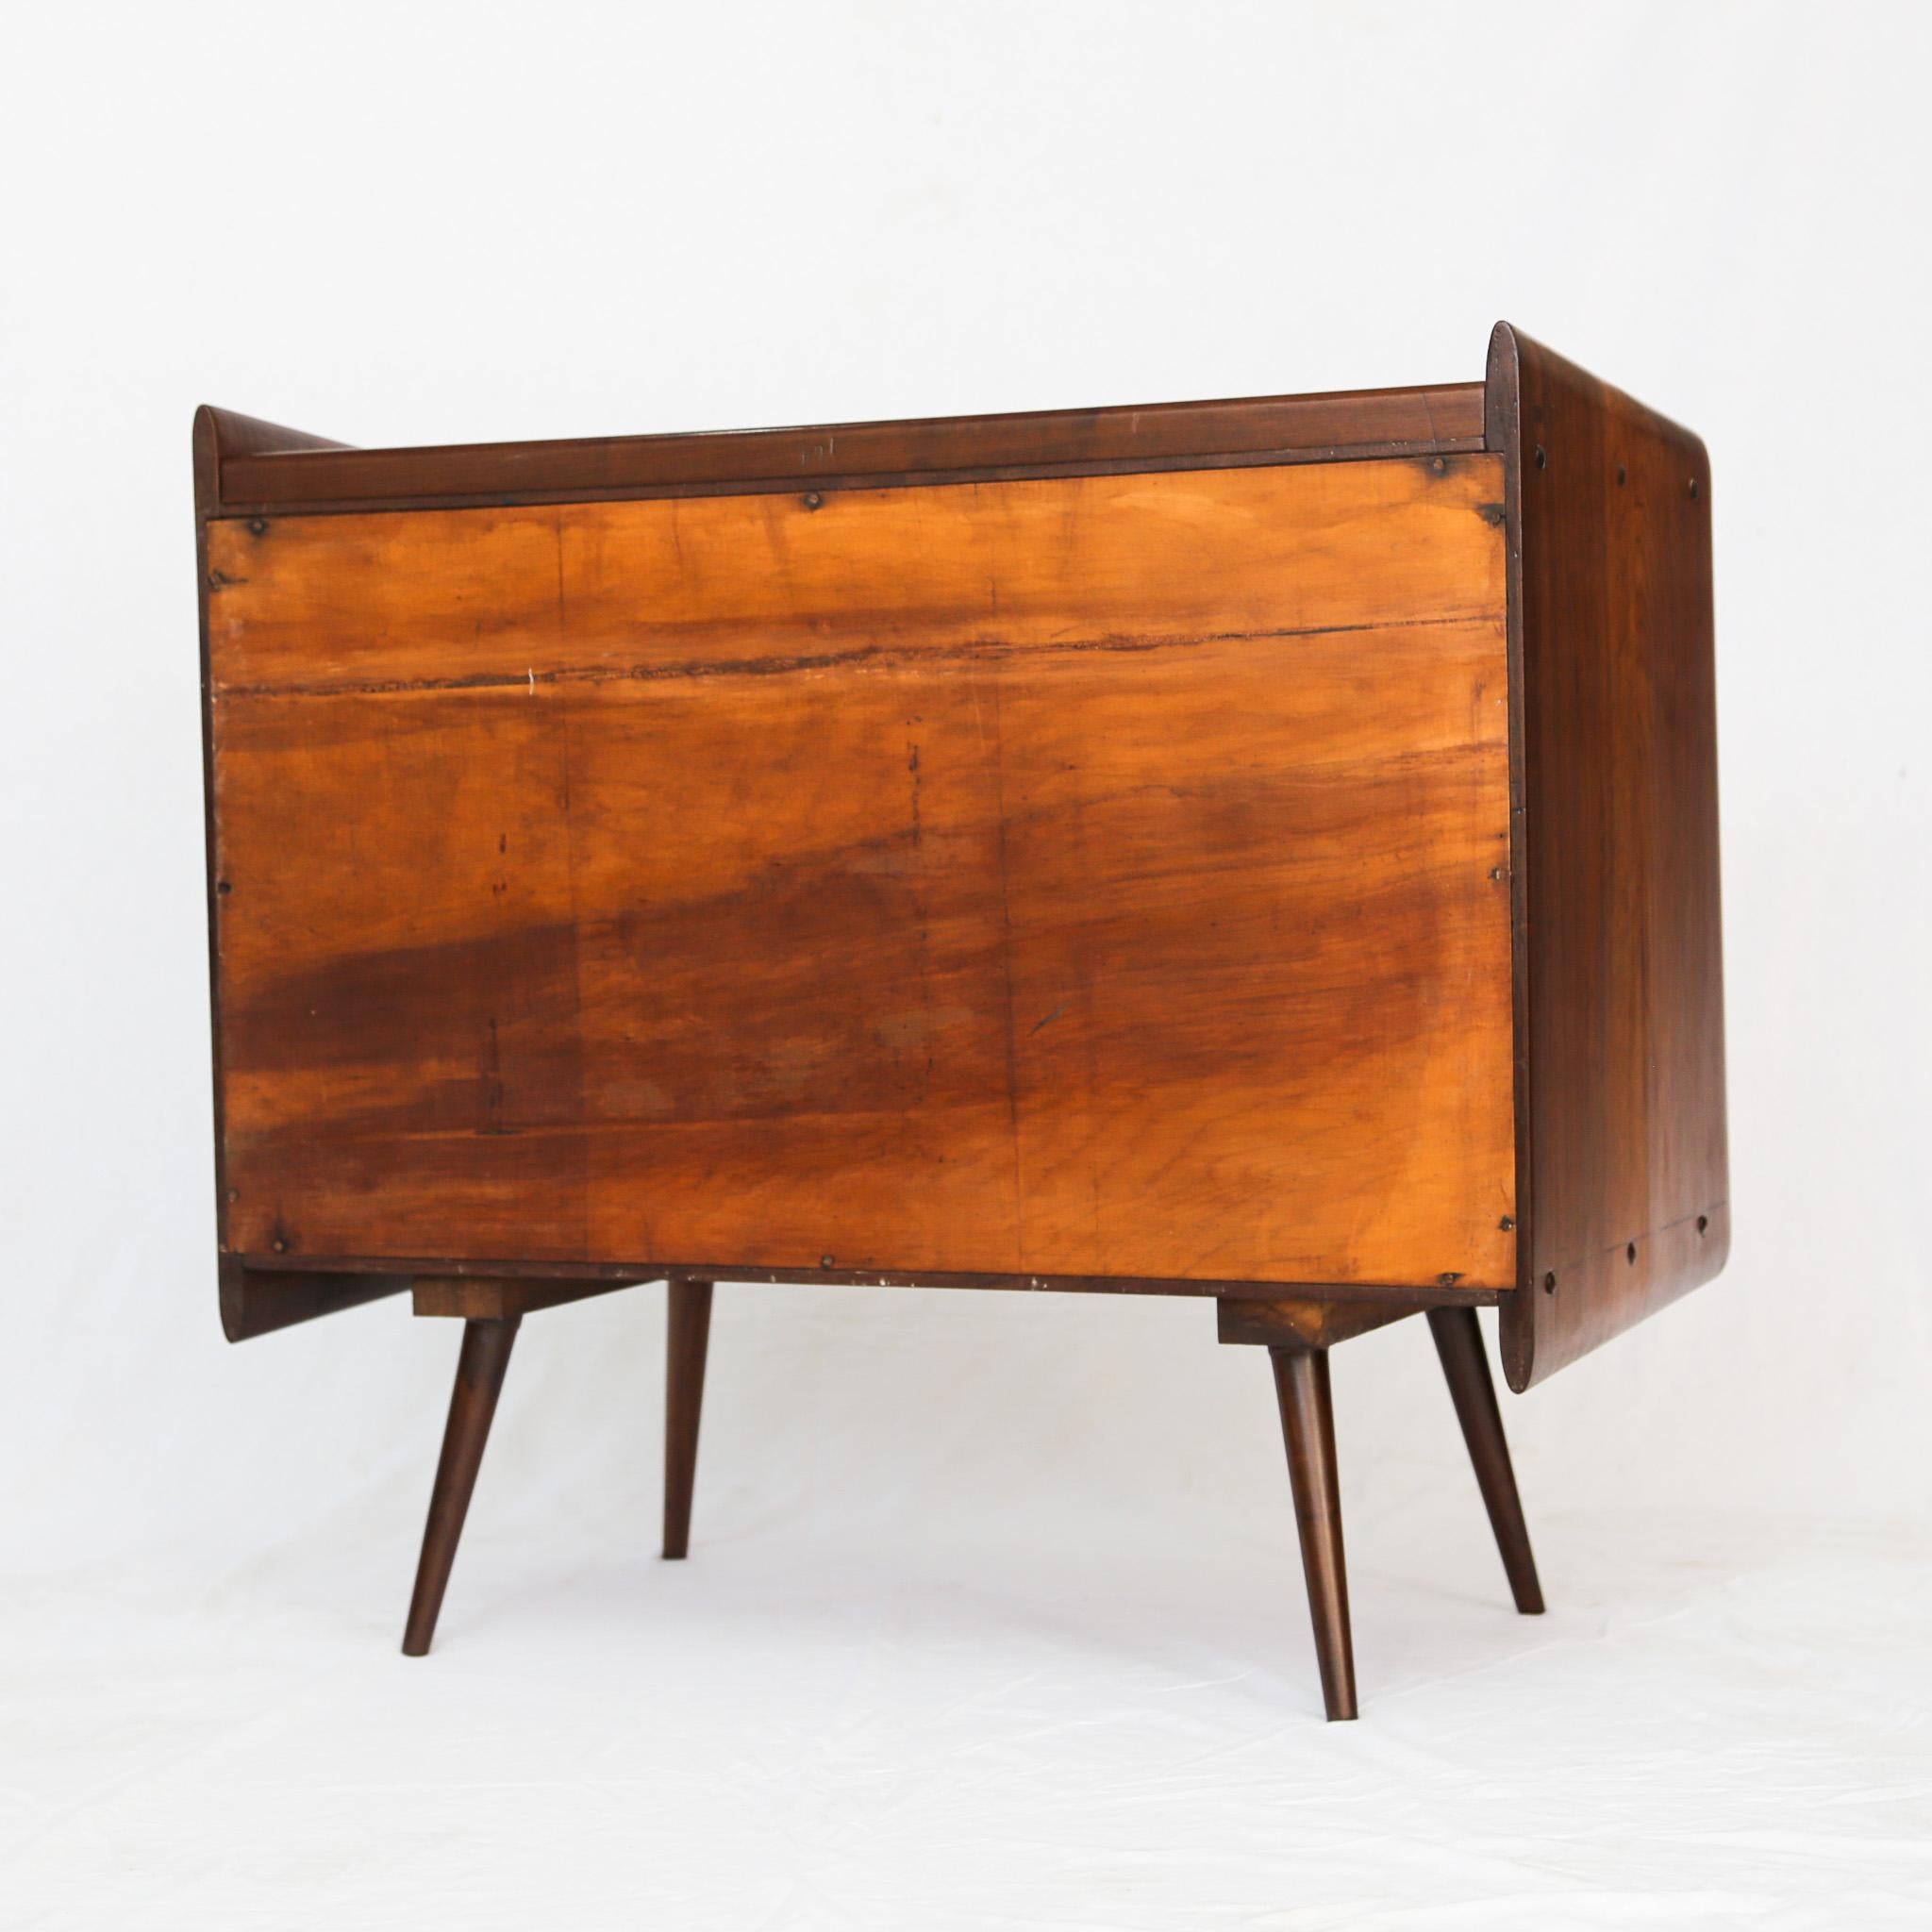 Brazilian Modern Chest of Drawers in Hardwood by Moveis Cimo, 1950s, Brazil 1